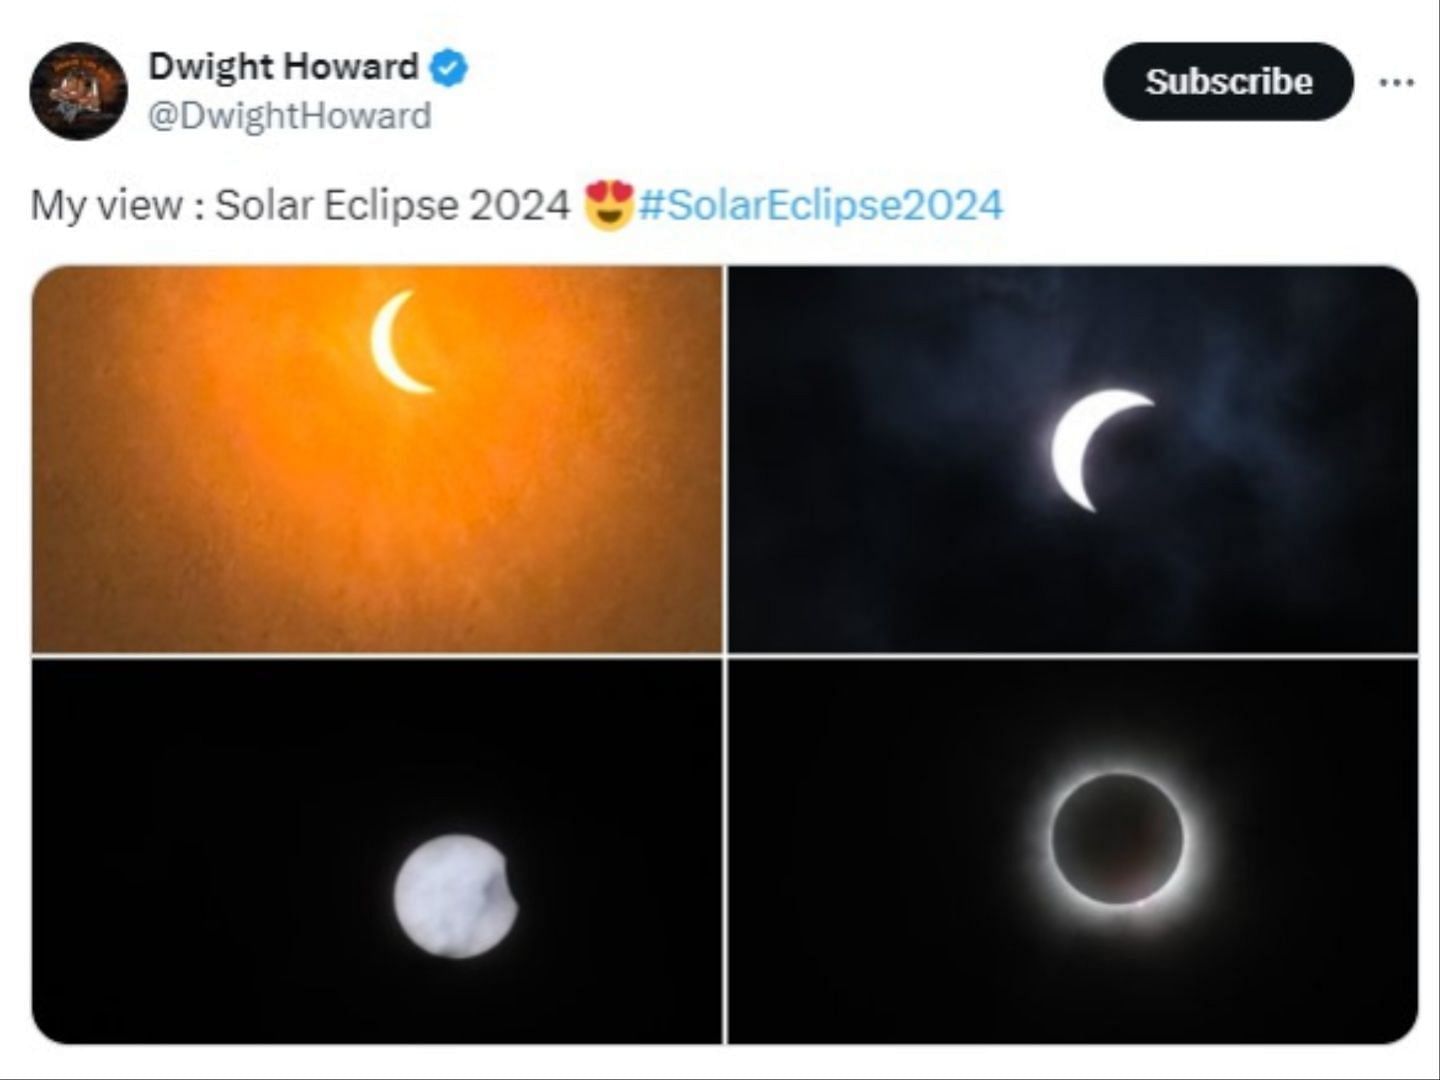 Howard captures the total solar eclipse